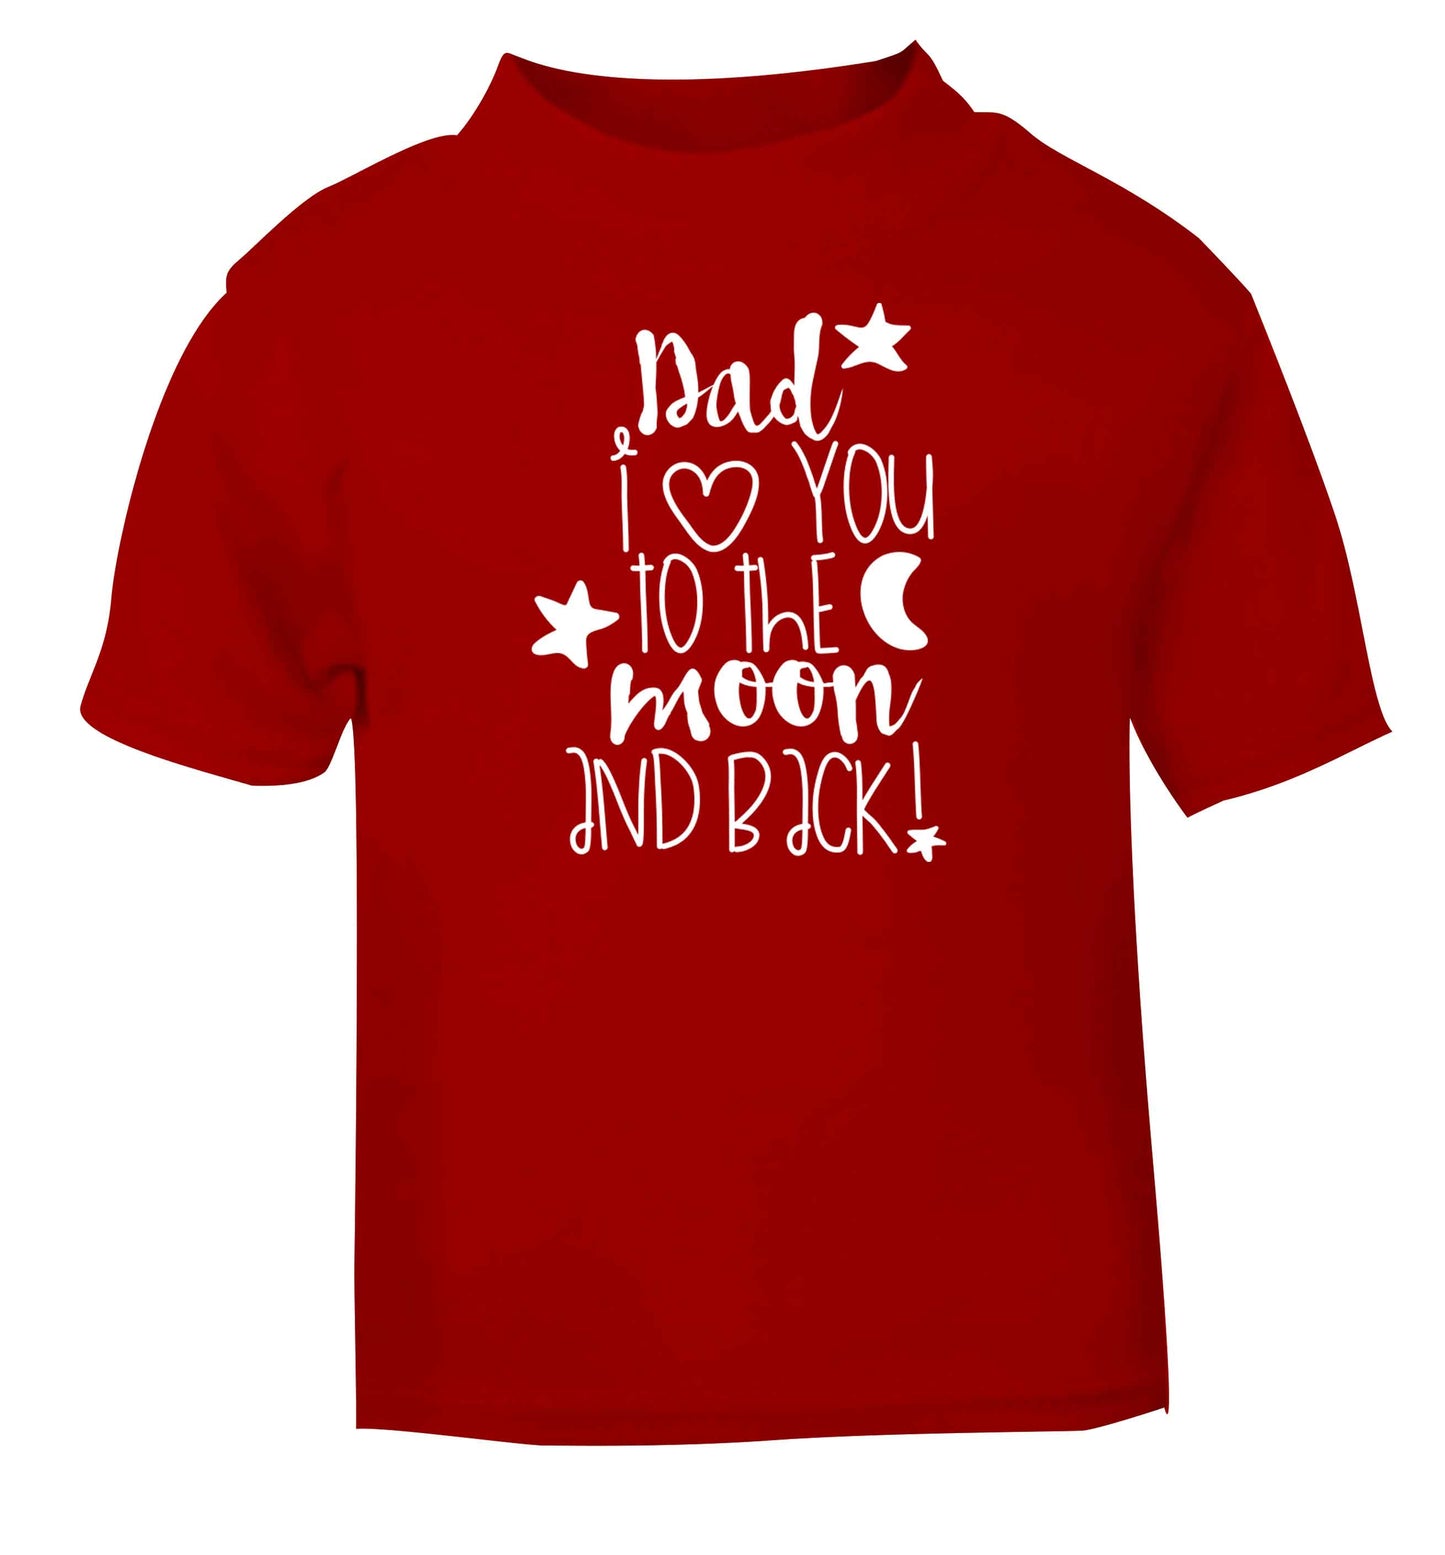 Dad I love you to the moon and back red baby toddler Tshirt 2 Years